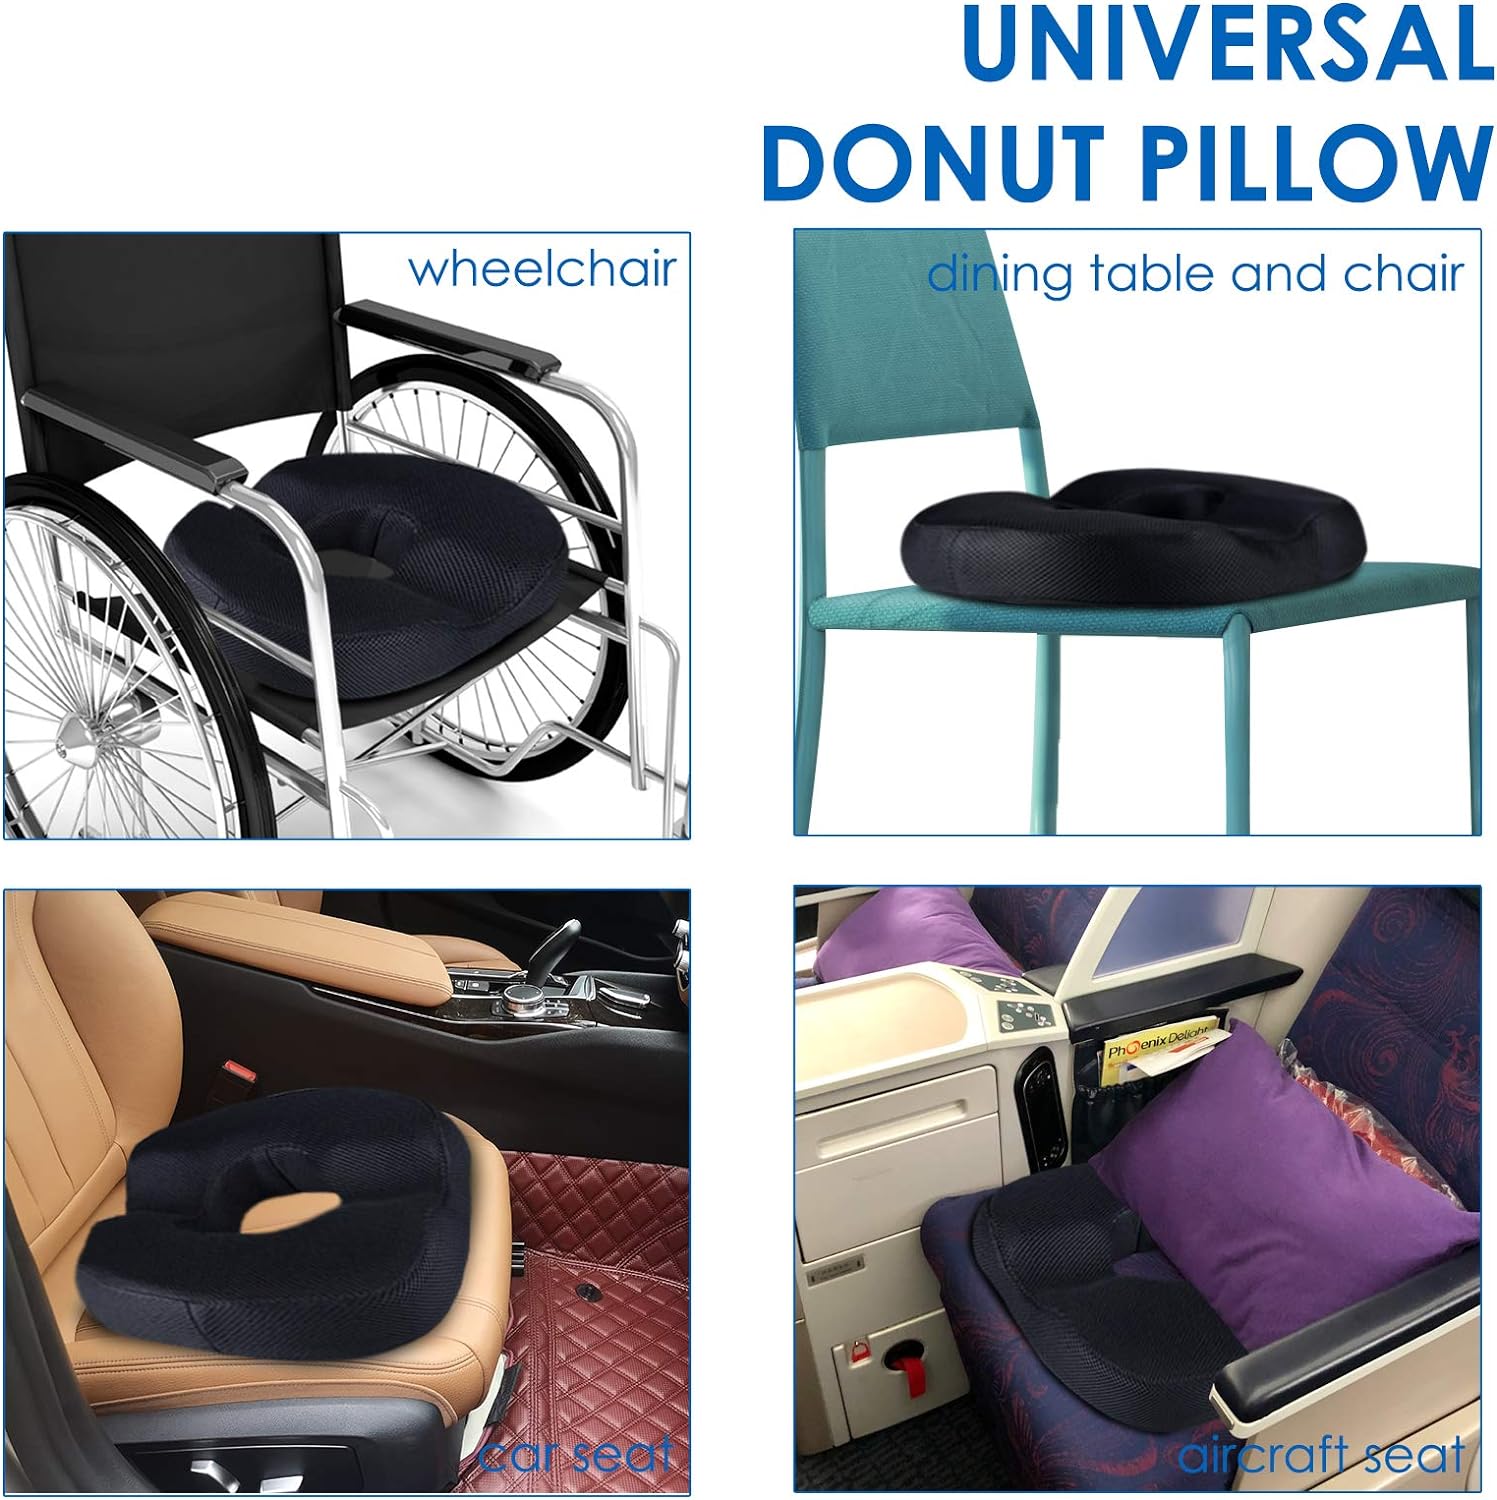 Different applications of the Donut Pillow Seat Cushion.